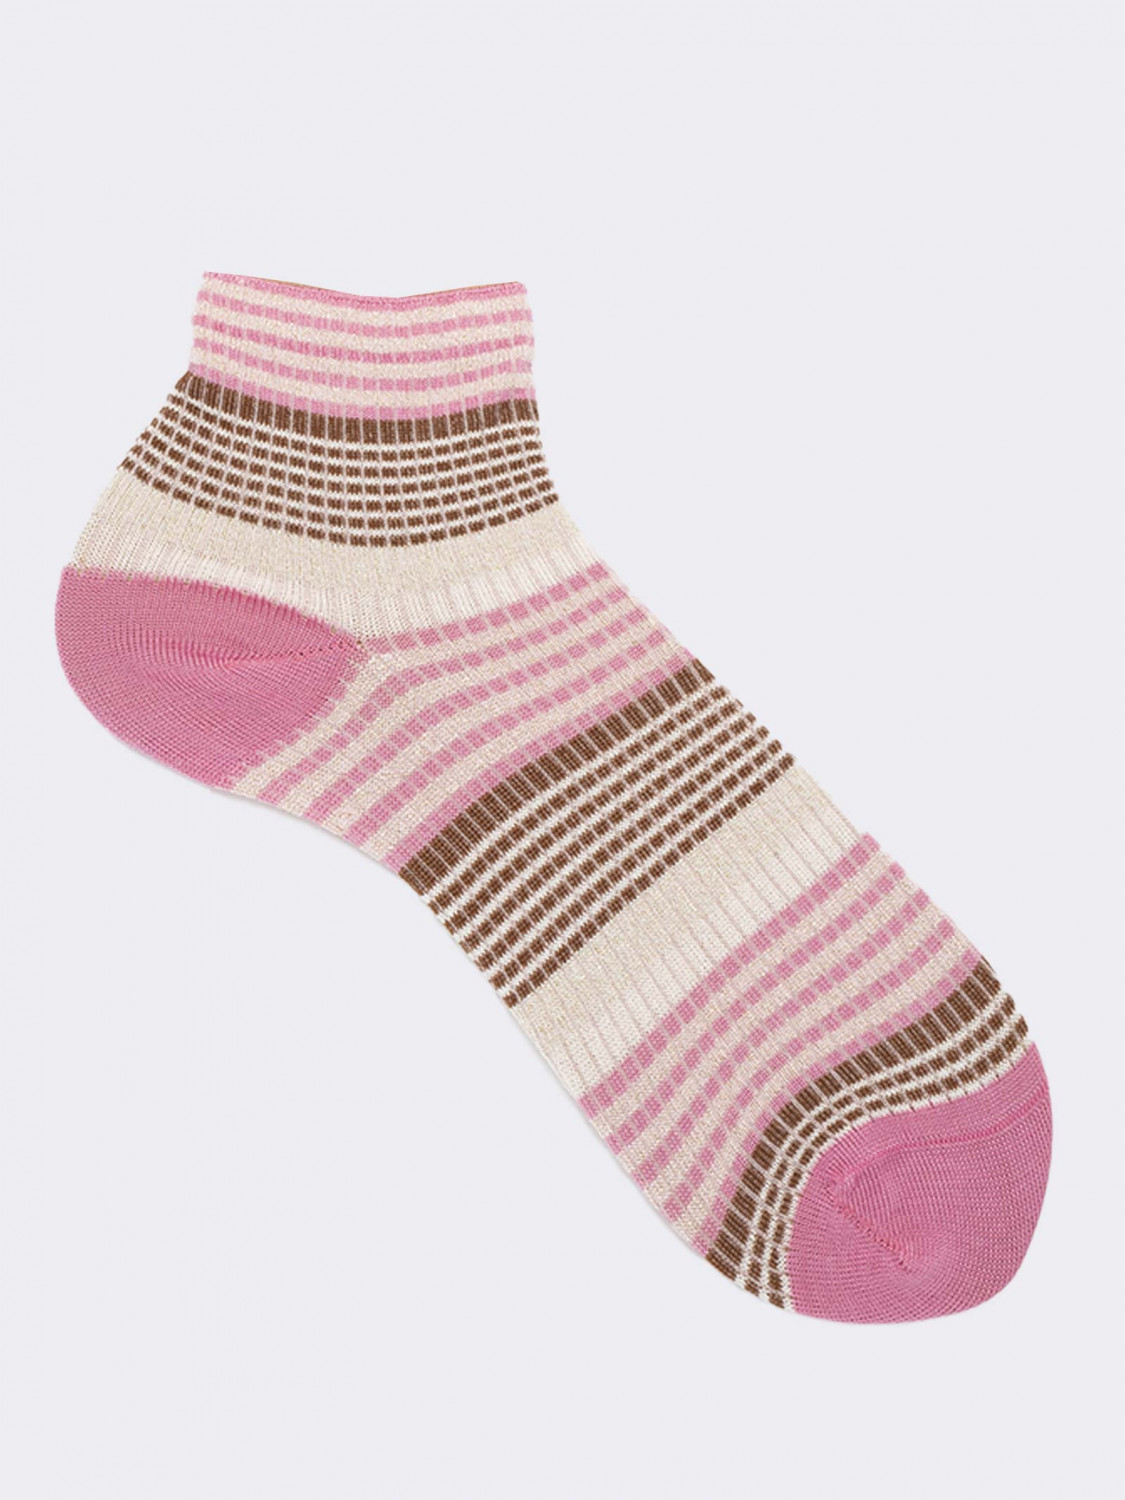 Women's calf socks with mixed stripes